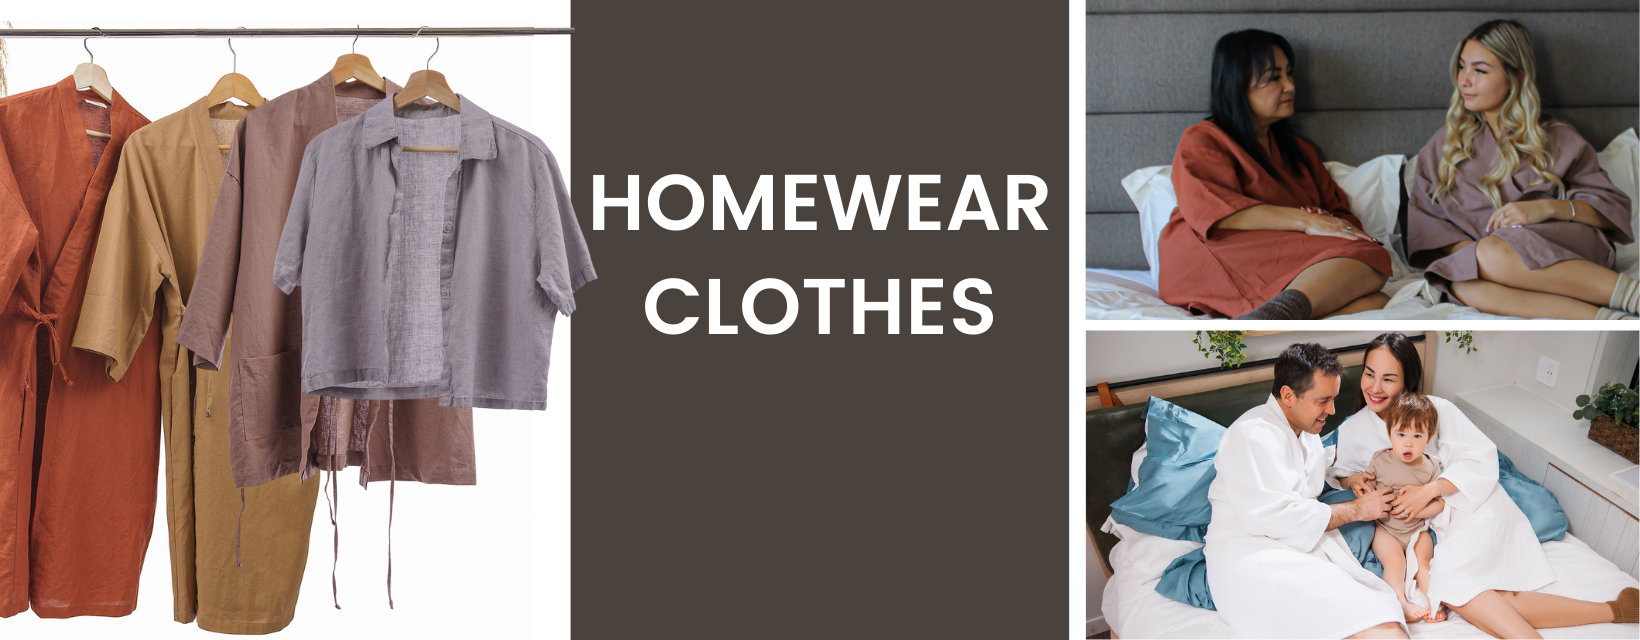 Homewear Clothes, Camelus